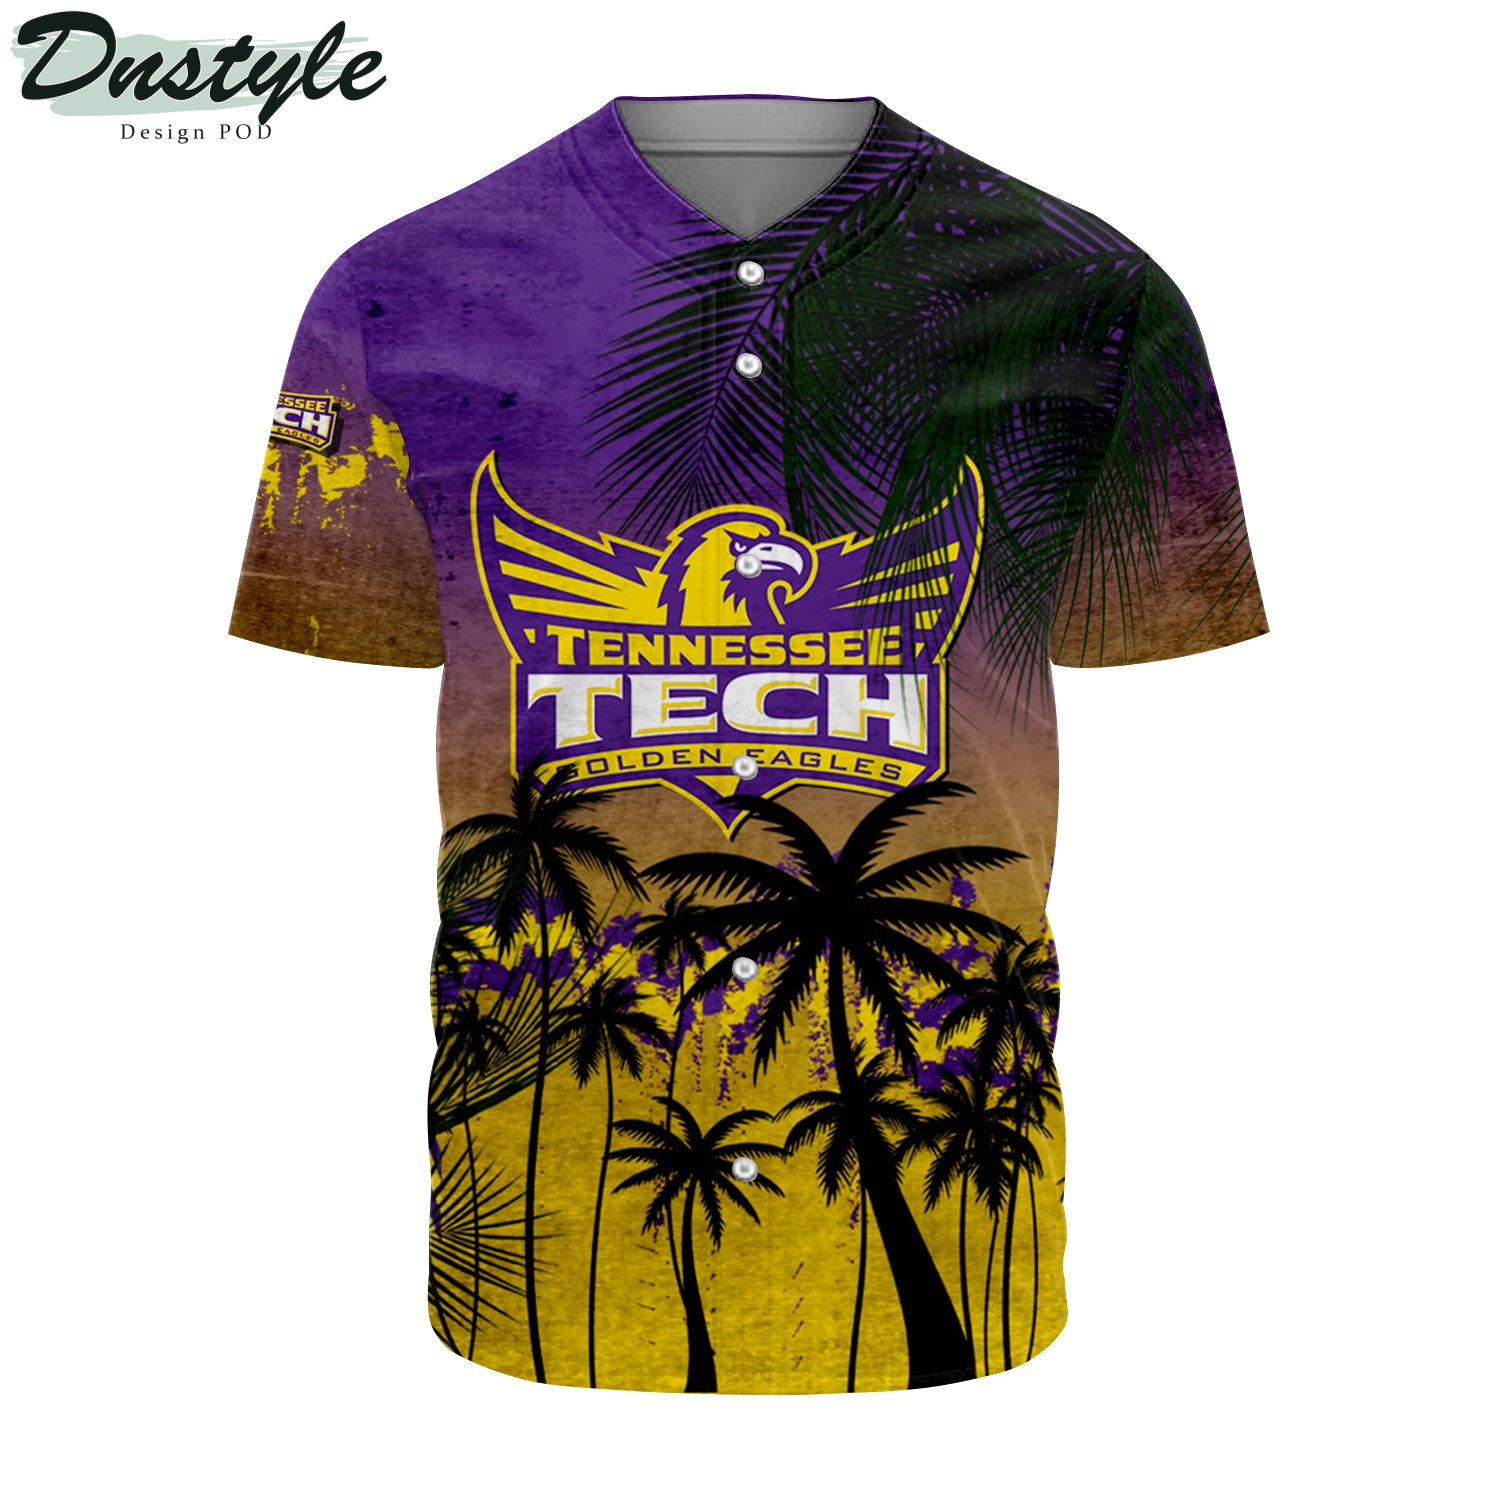 Tennessee Tech Golden Eagles Baseball Jersey Coconut Tree Tropical Grunge